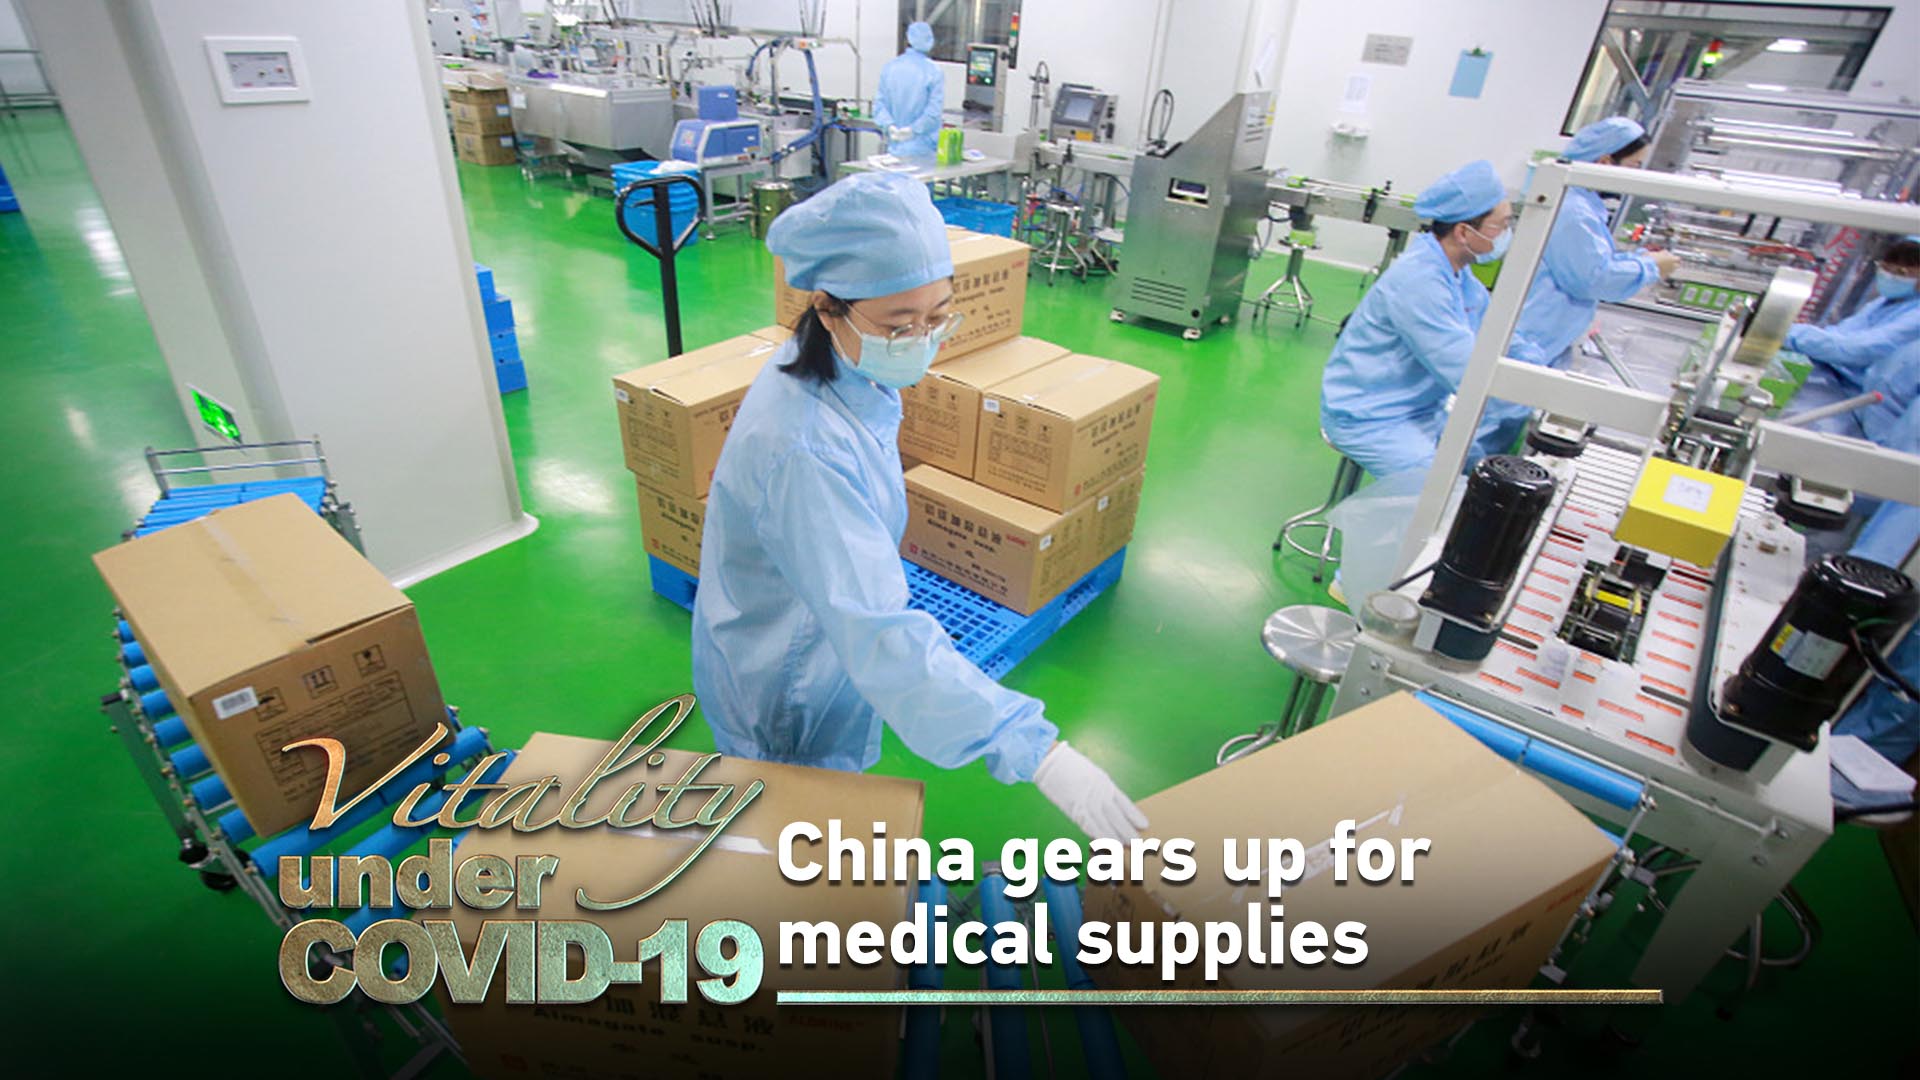 Vitality under COVID-19: China gears up for medical supplies